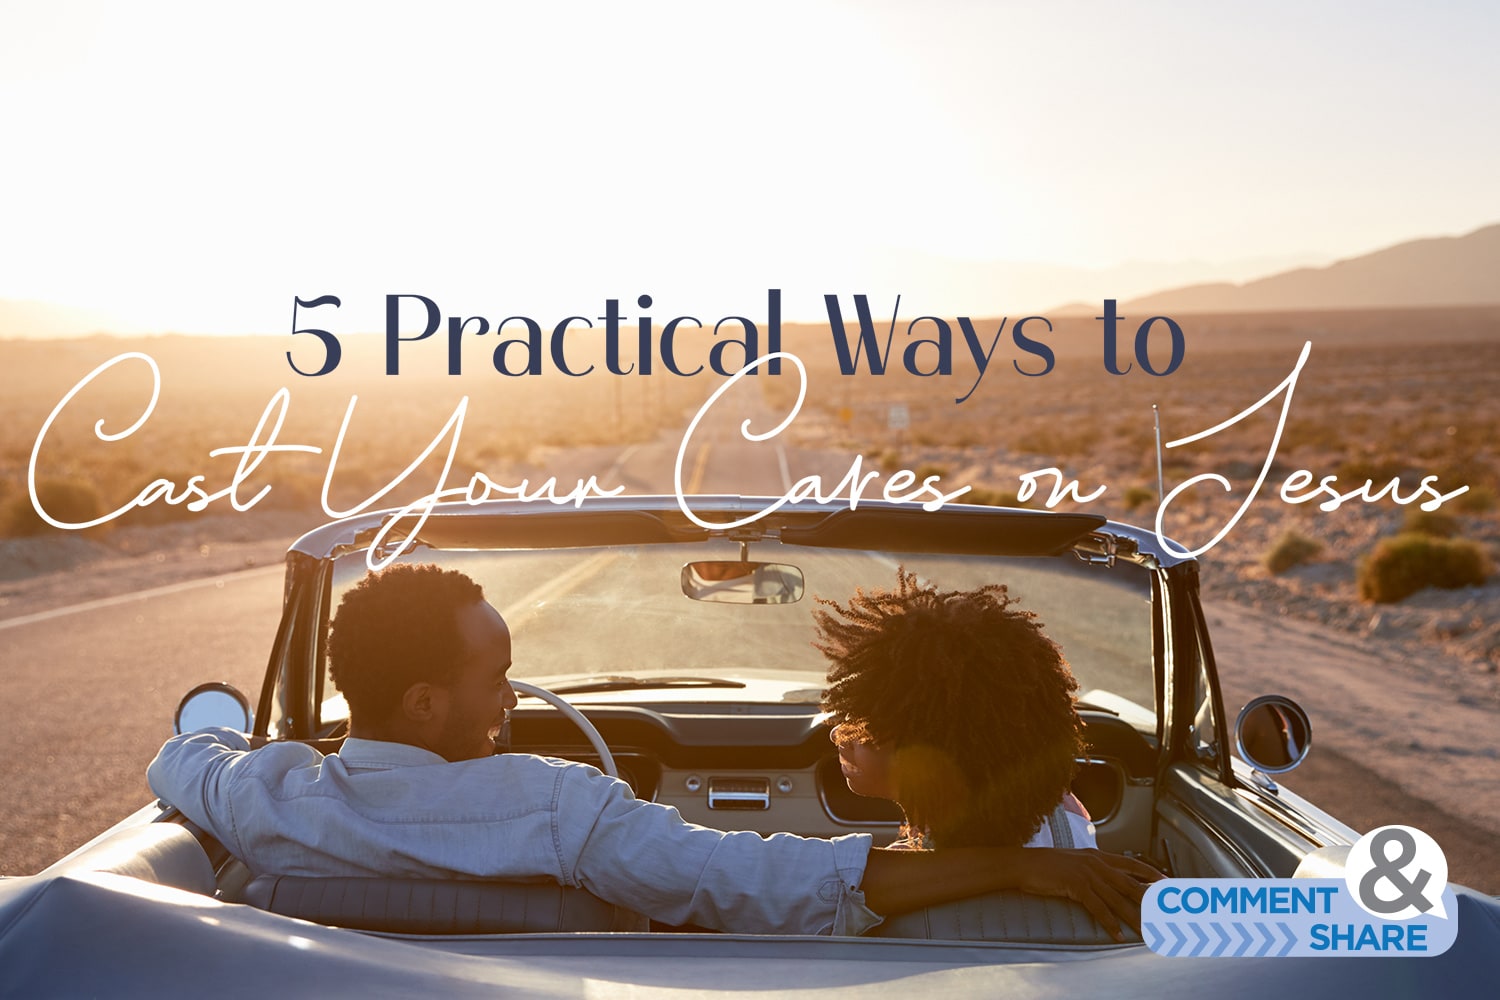 5 Practical Ways to Cast Your Cares on Jesus